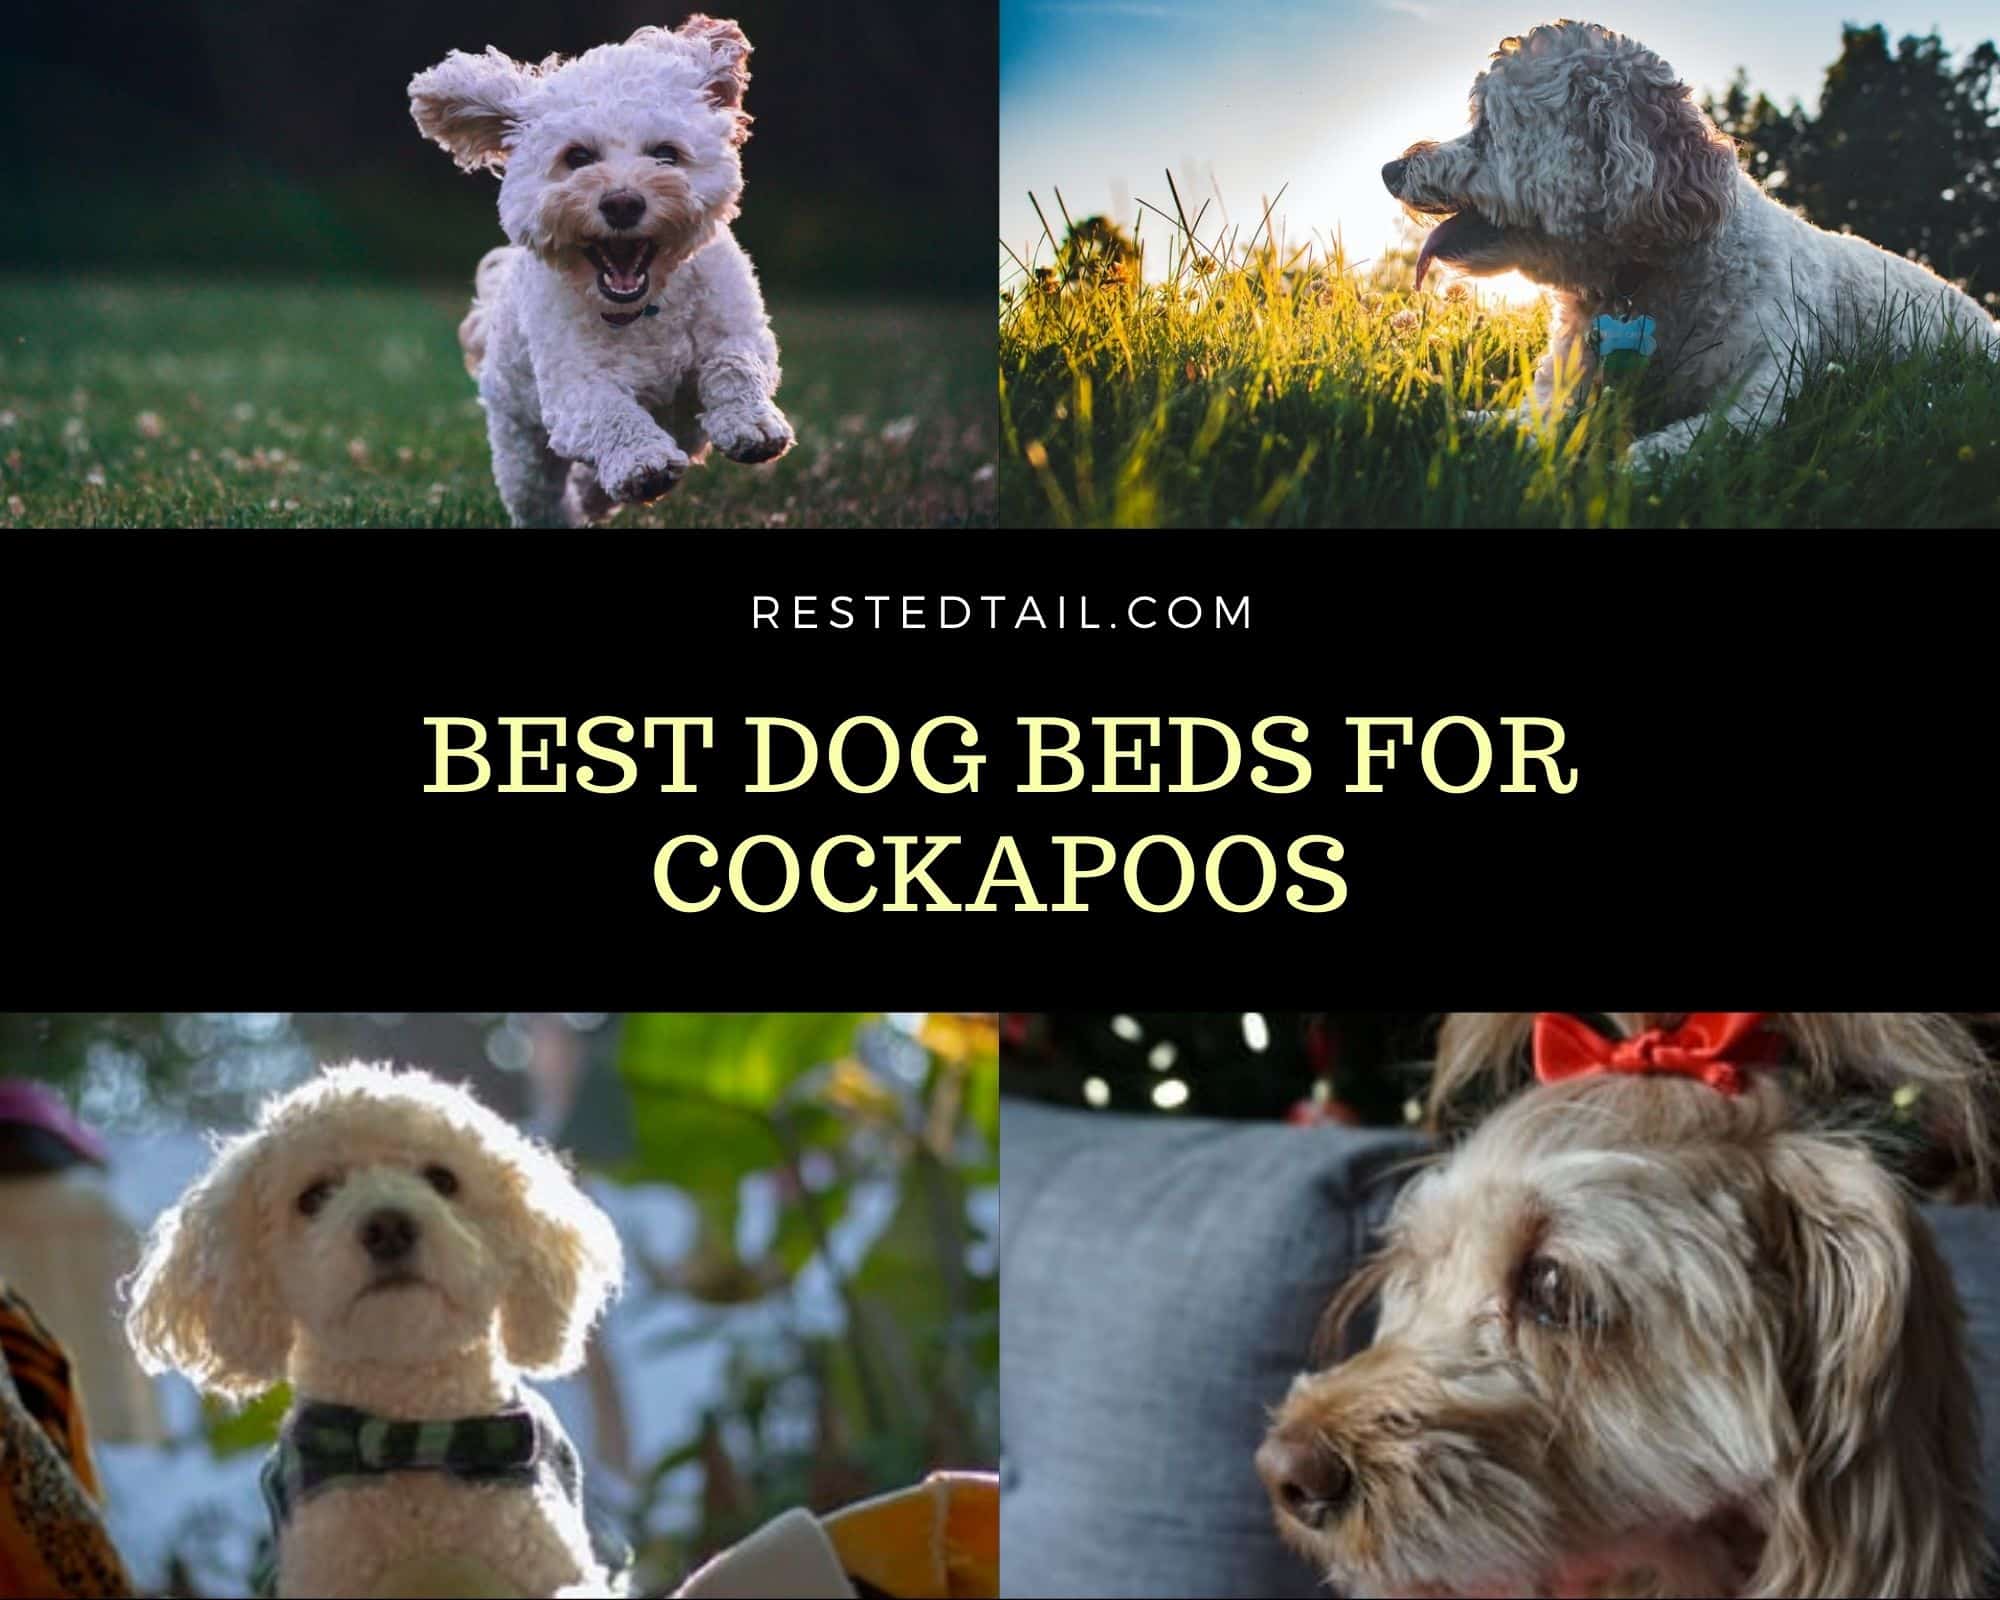 Best Dog Beds For Cockapoos feature image